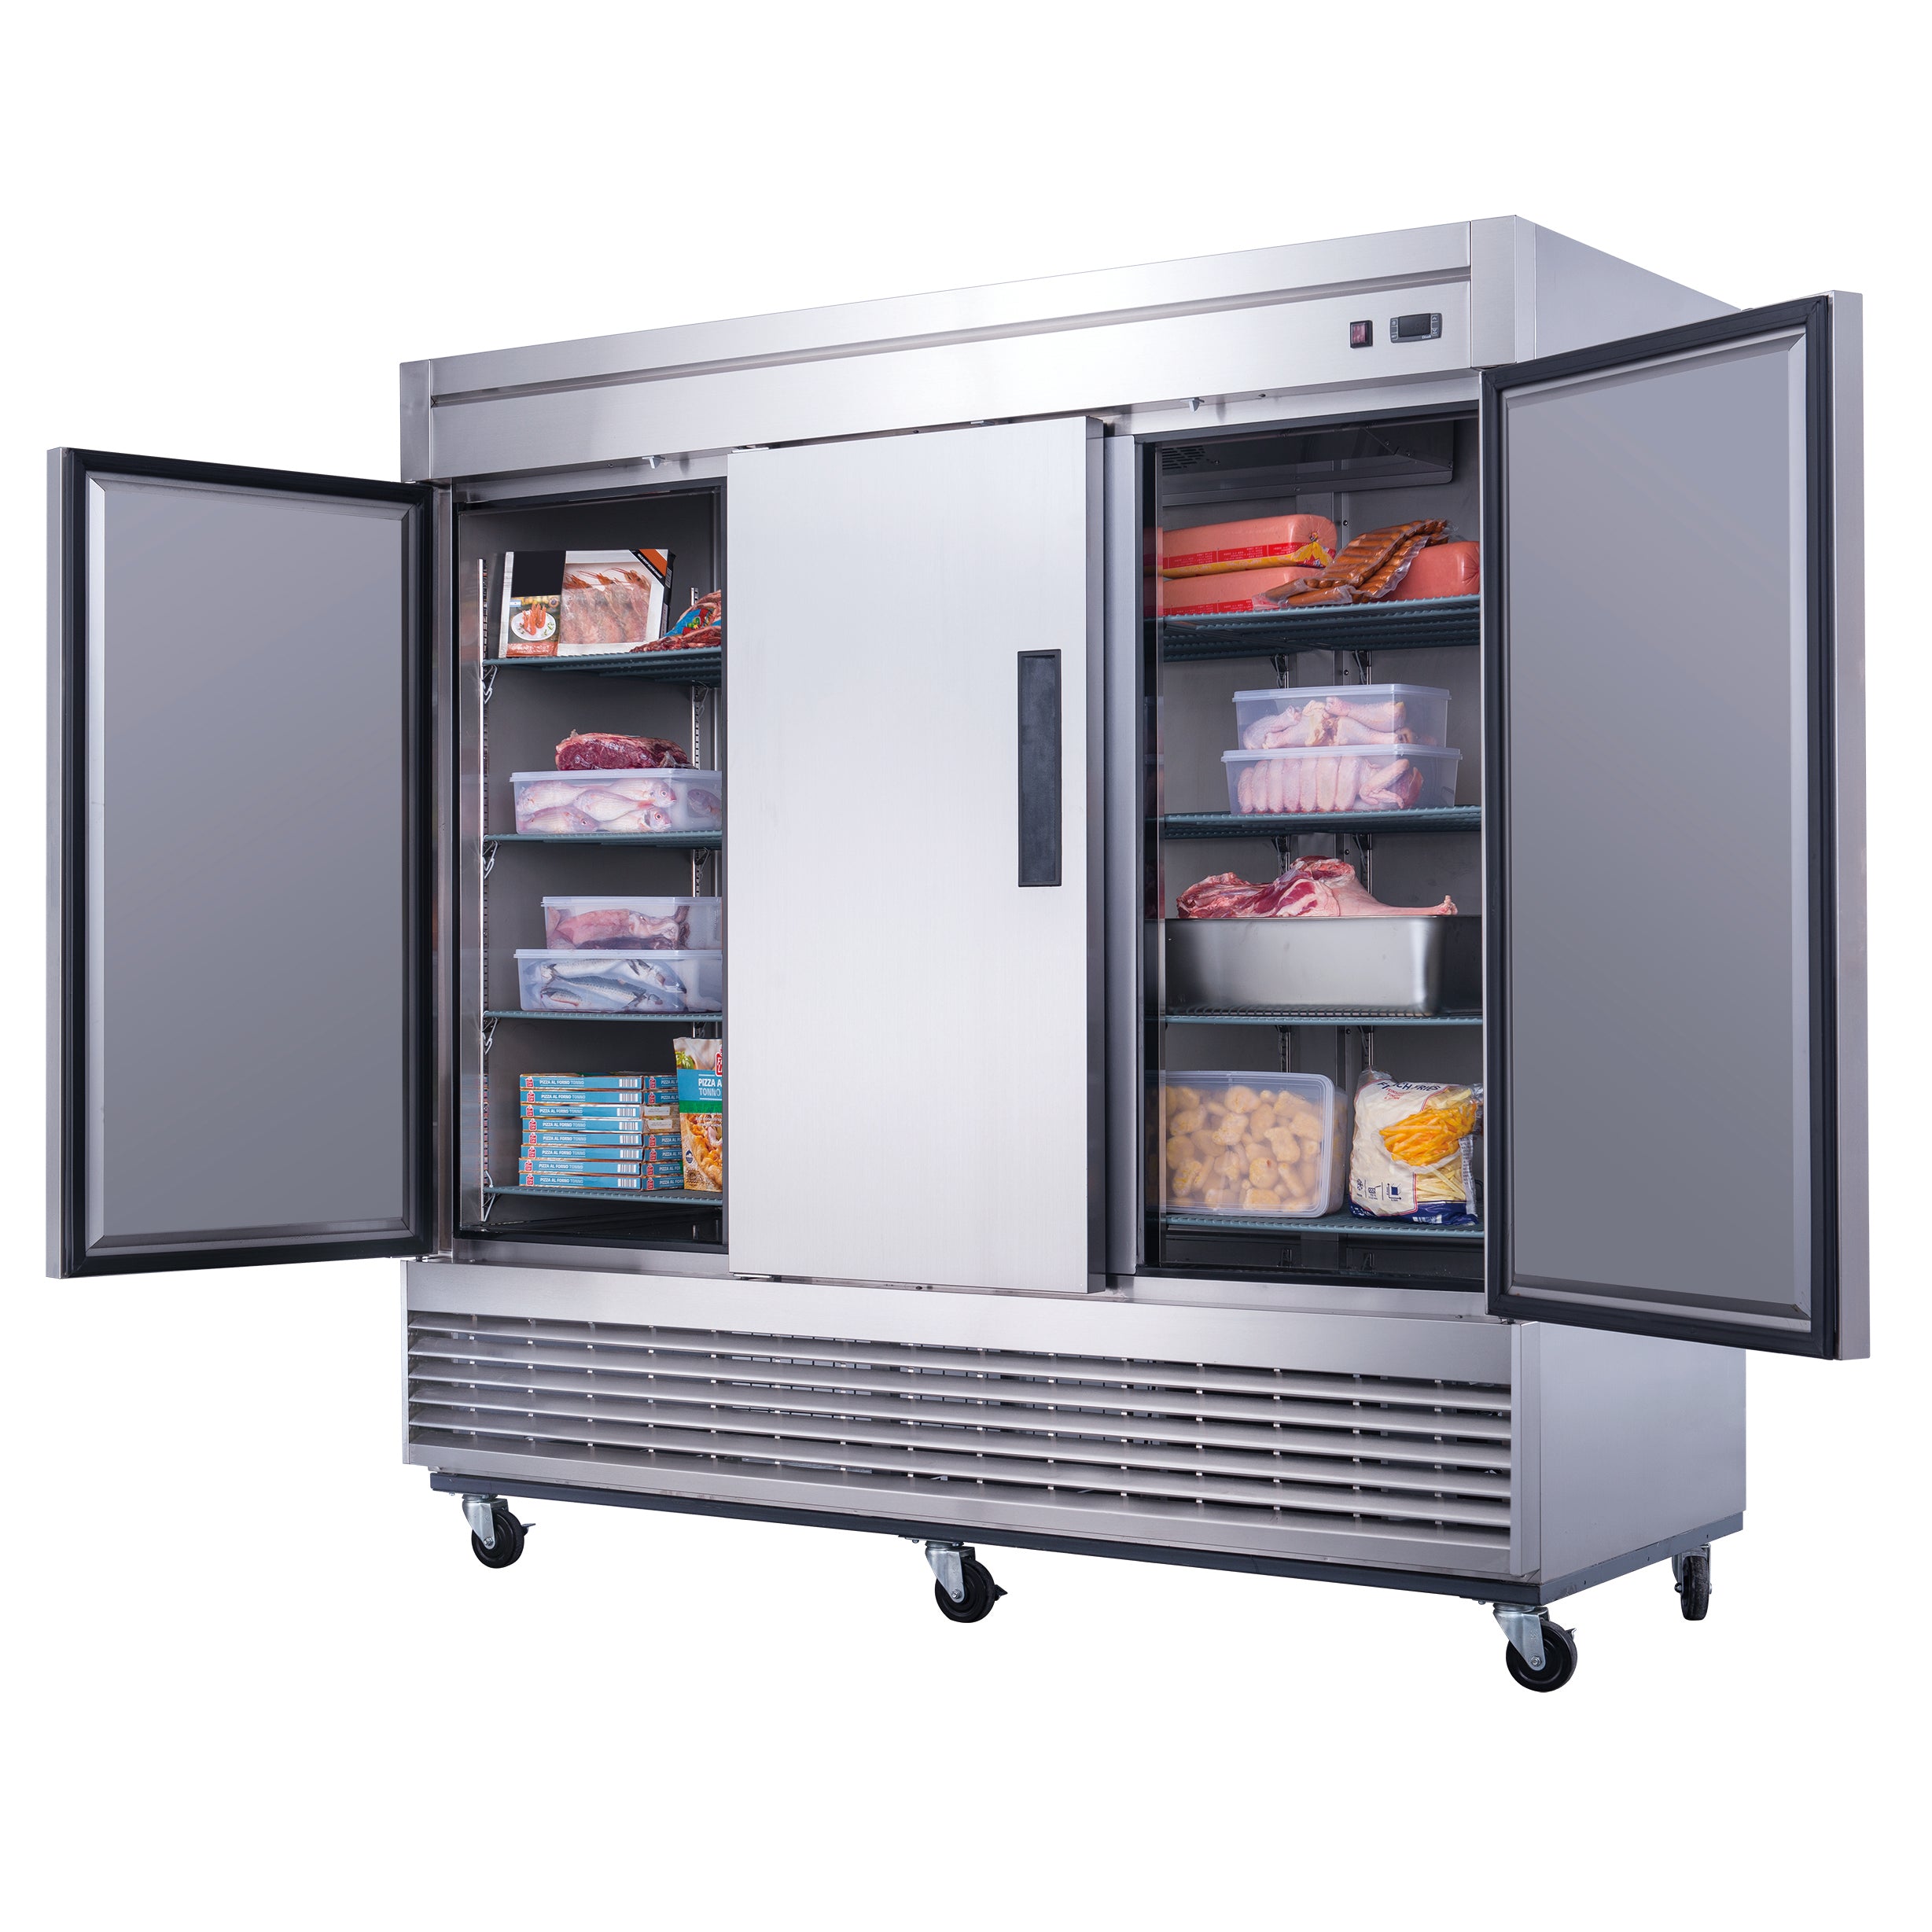 Chef AAA - T83R, Commercial 83" Reach-In Refrigerator 3 Solid Door Stainless Steel 64 cu.ft.